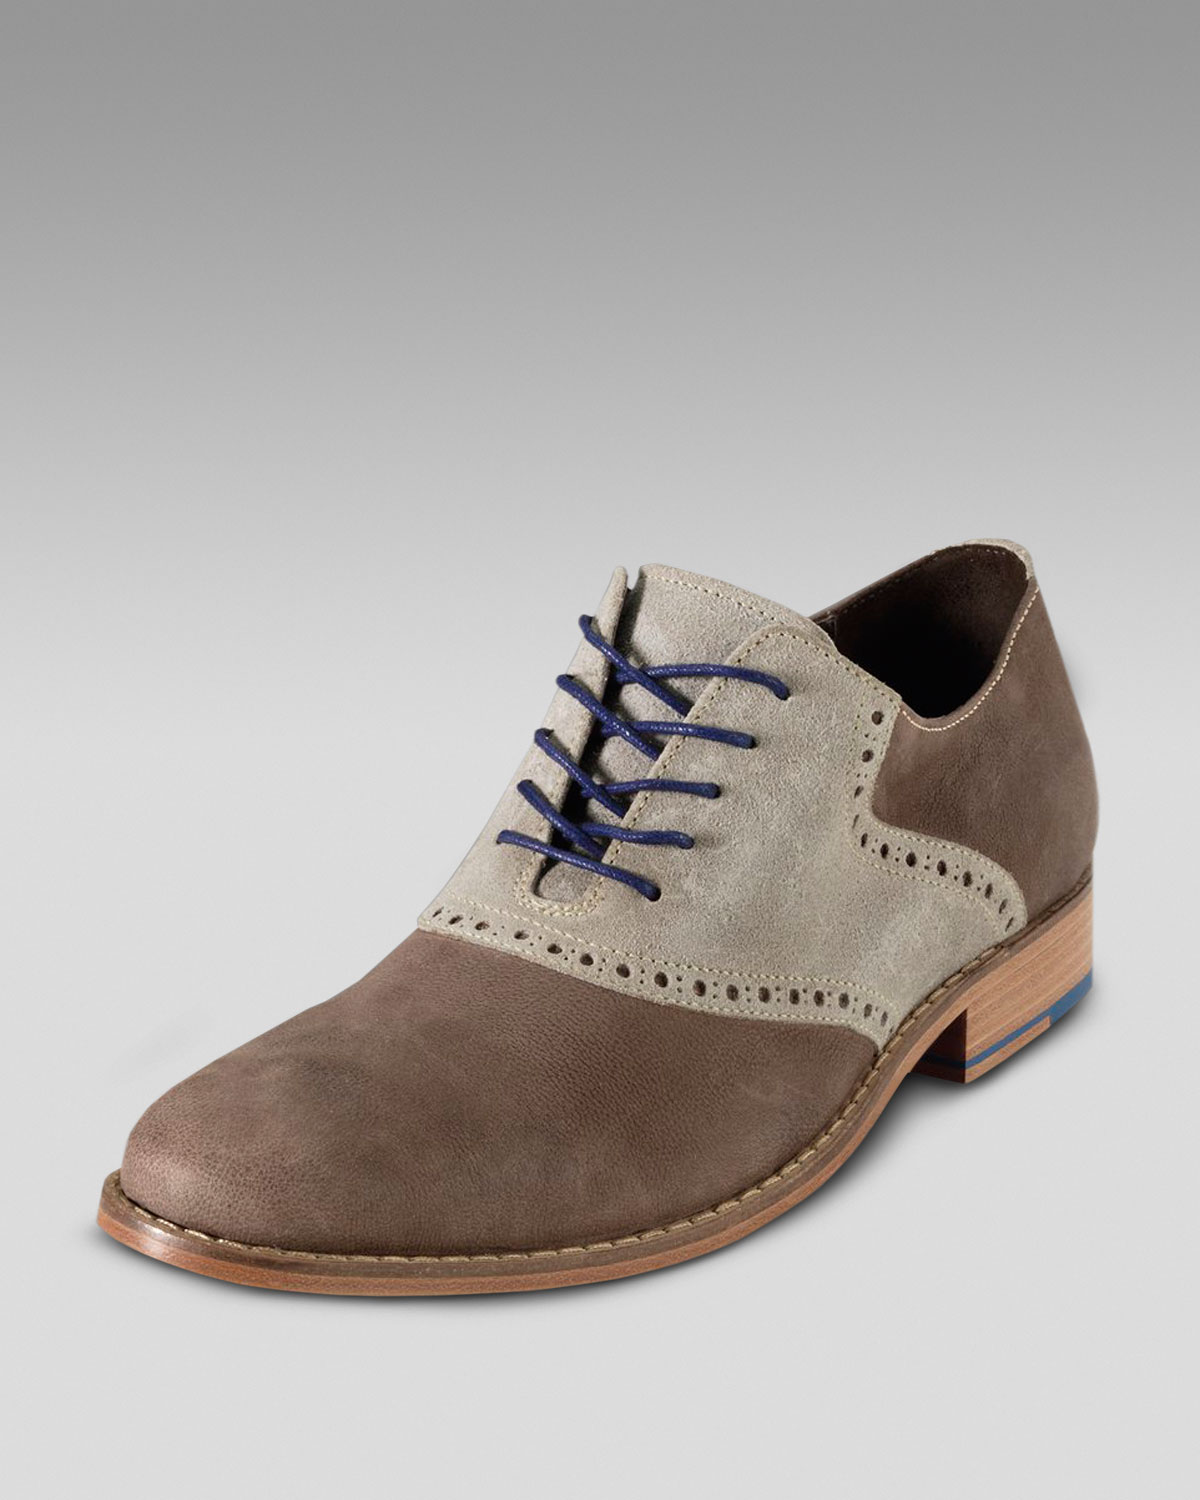 86  Cole haan mens shoes with nike soles Combine with Best Outfit